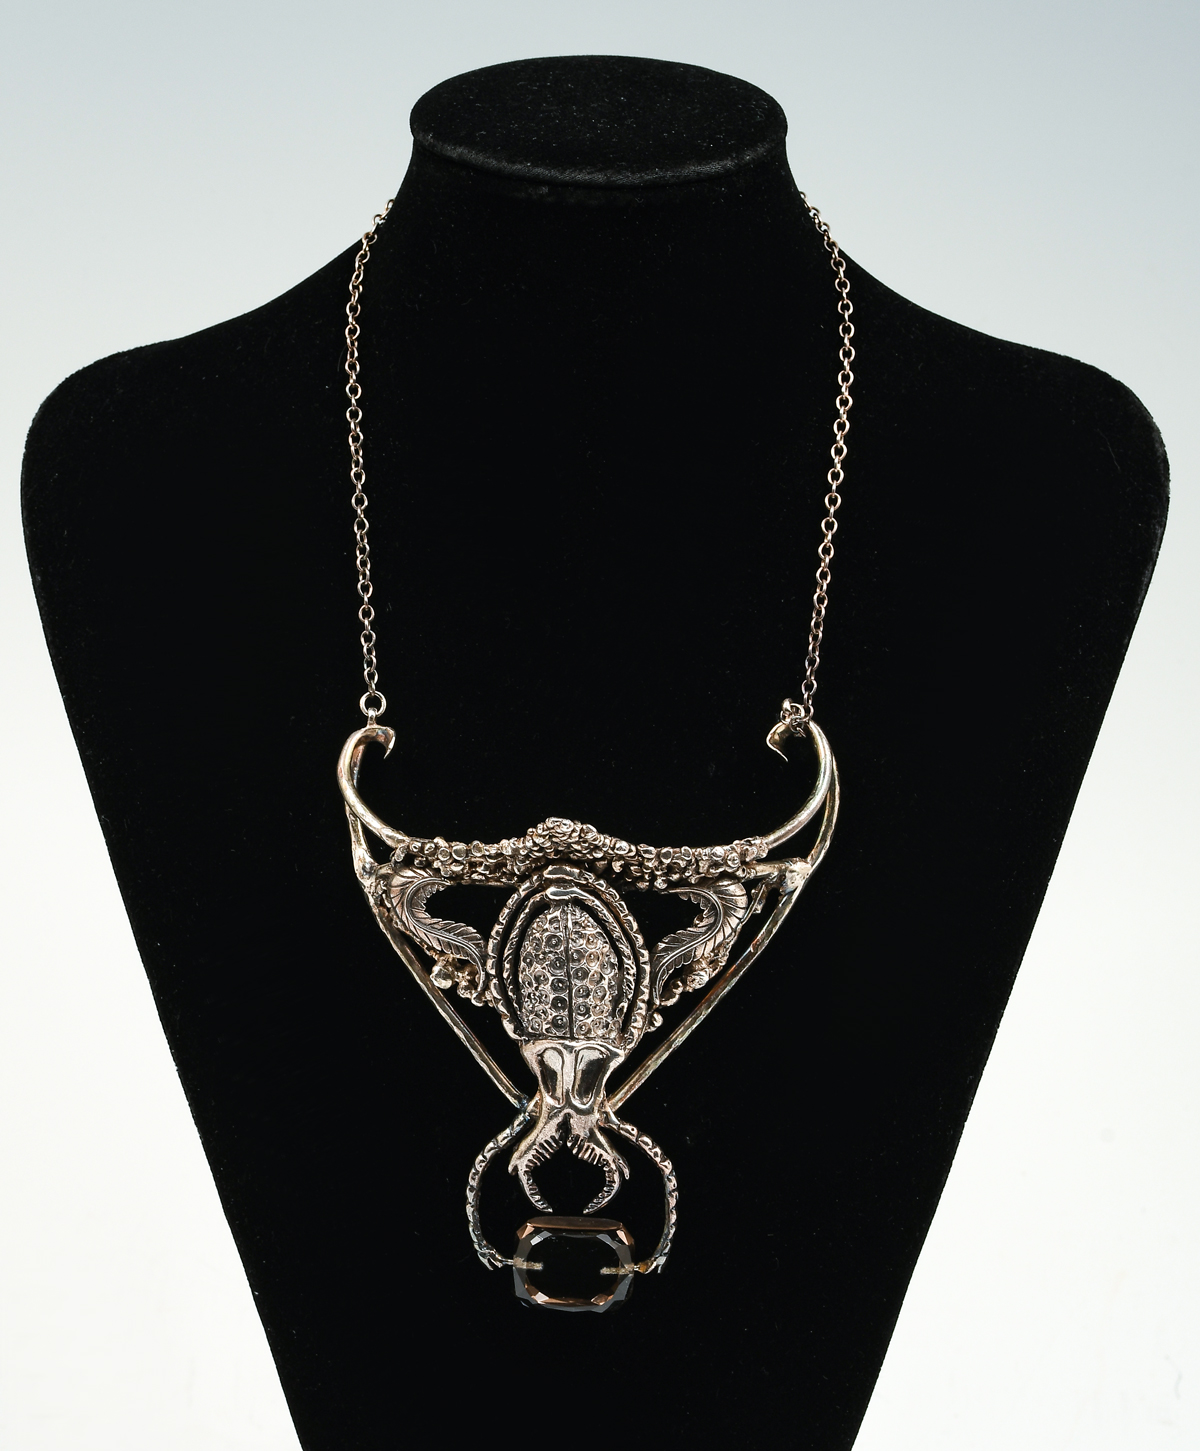 UNUSUAL STERLING SCARAB NECKLACE 2761a0